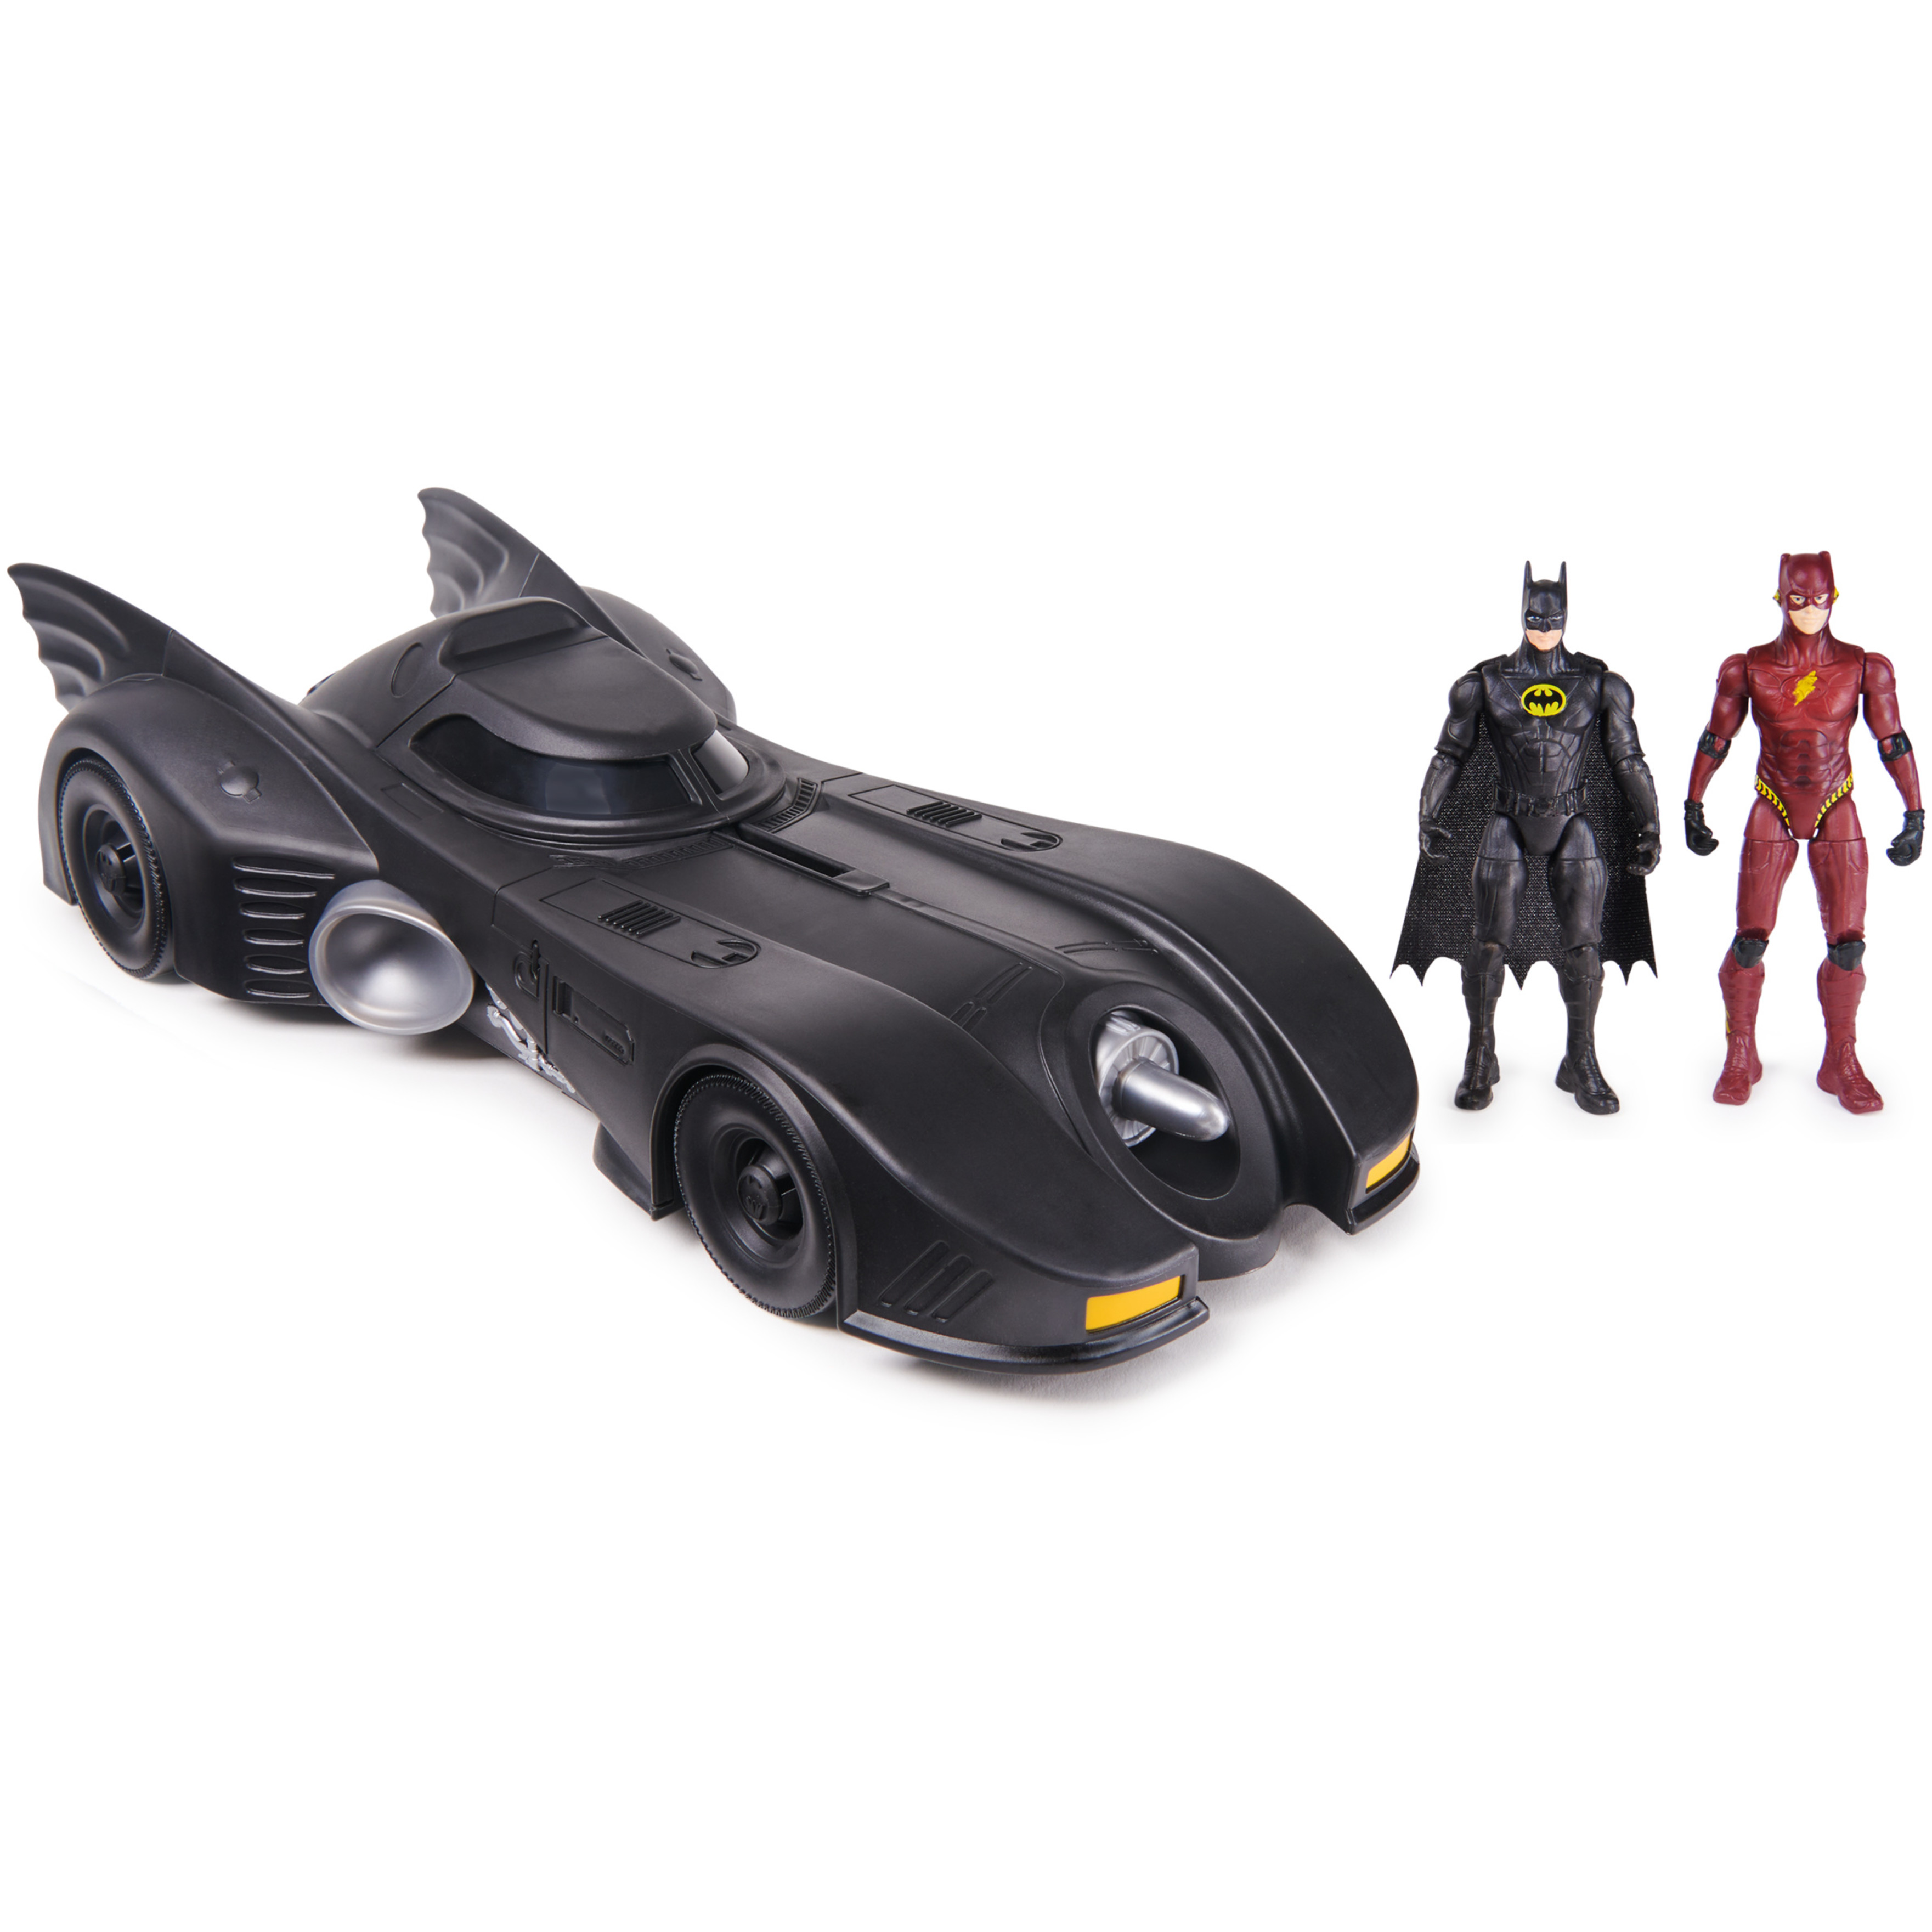 DC Comics: The Flash Batmobile 3-Pack with 2 Figures and Batmobile - image 1 of 8